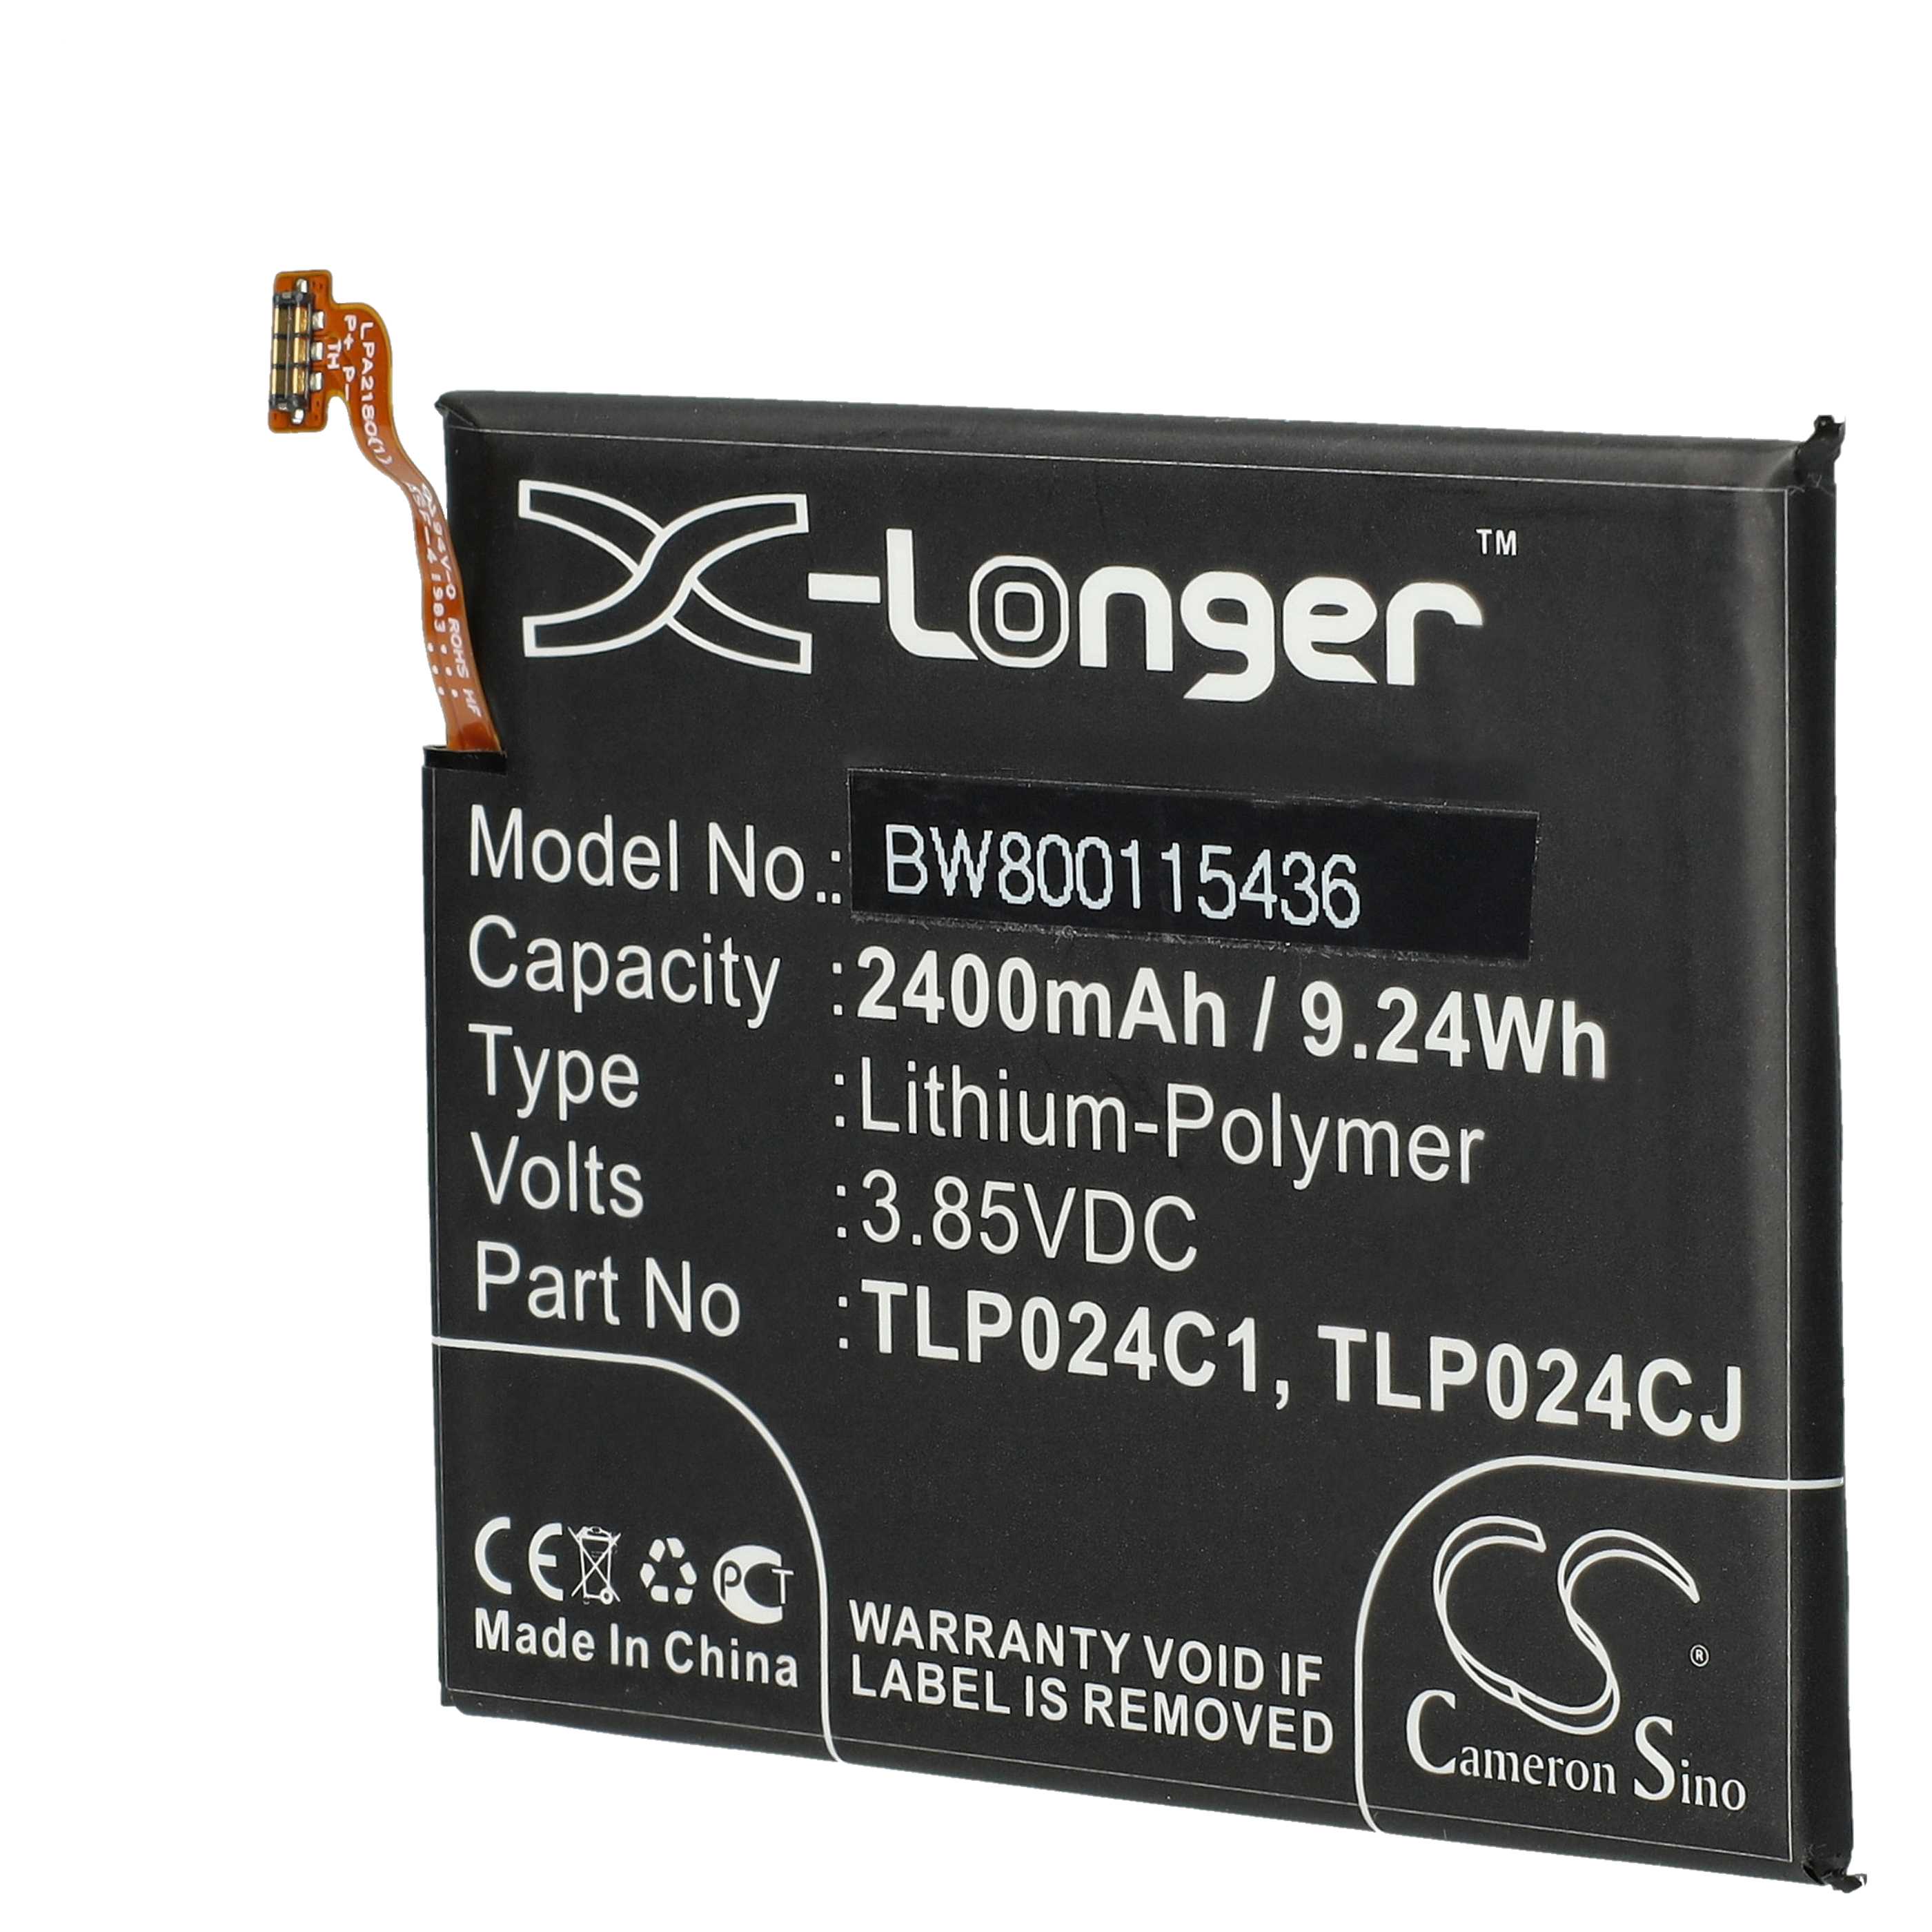 Mobile Phone Battery Replacement for TLP024C2, TLP024C1, CAC2400011C1, C2400007C2 - 2400mAh 3.85V Li-polymer